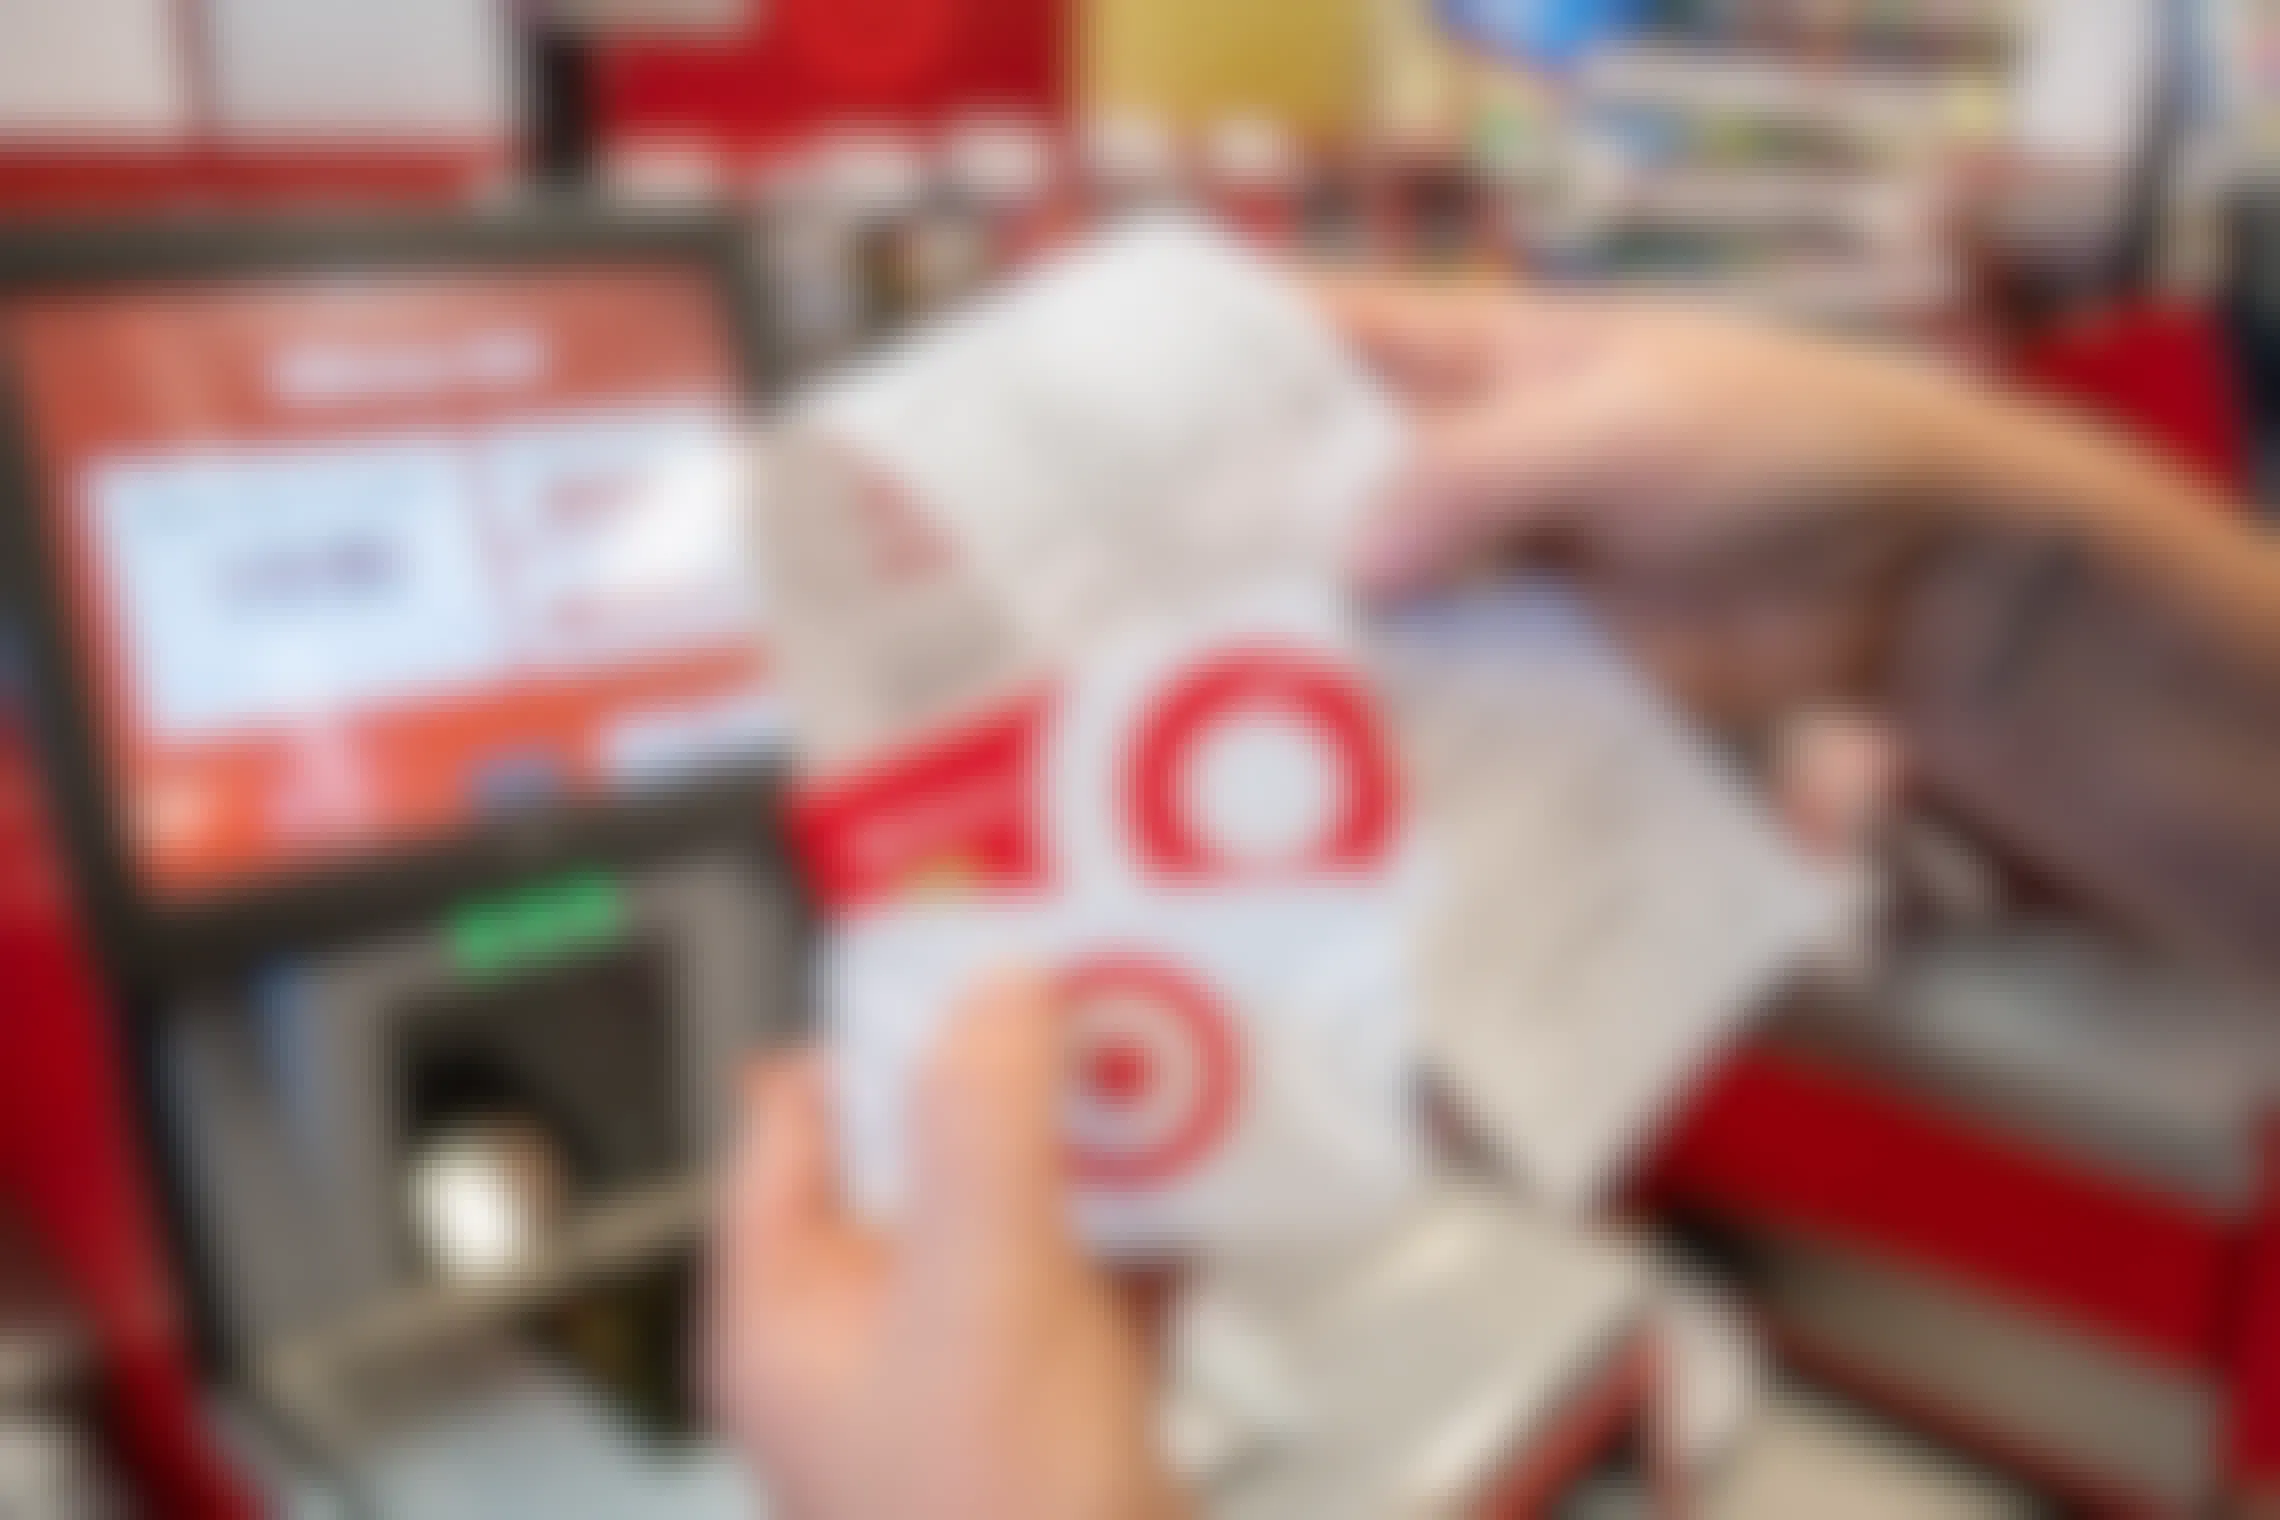 A person's hands holding up a Target gift card, a Target Red Card, and a receipt in front of the self-checkout scanner at Target.